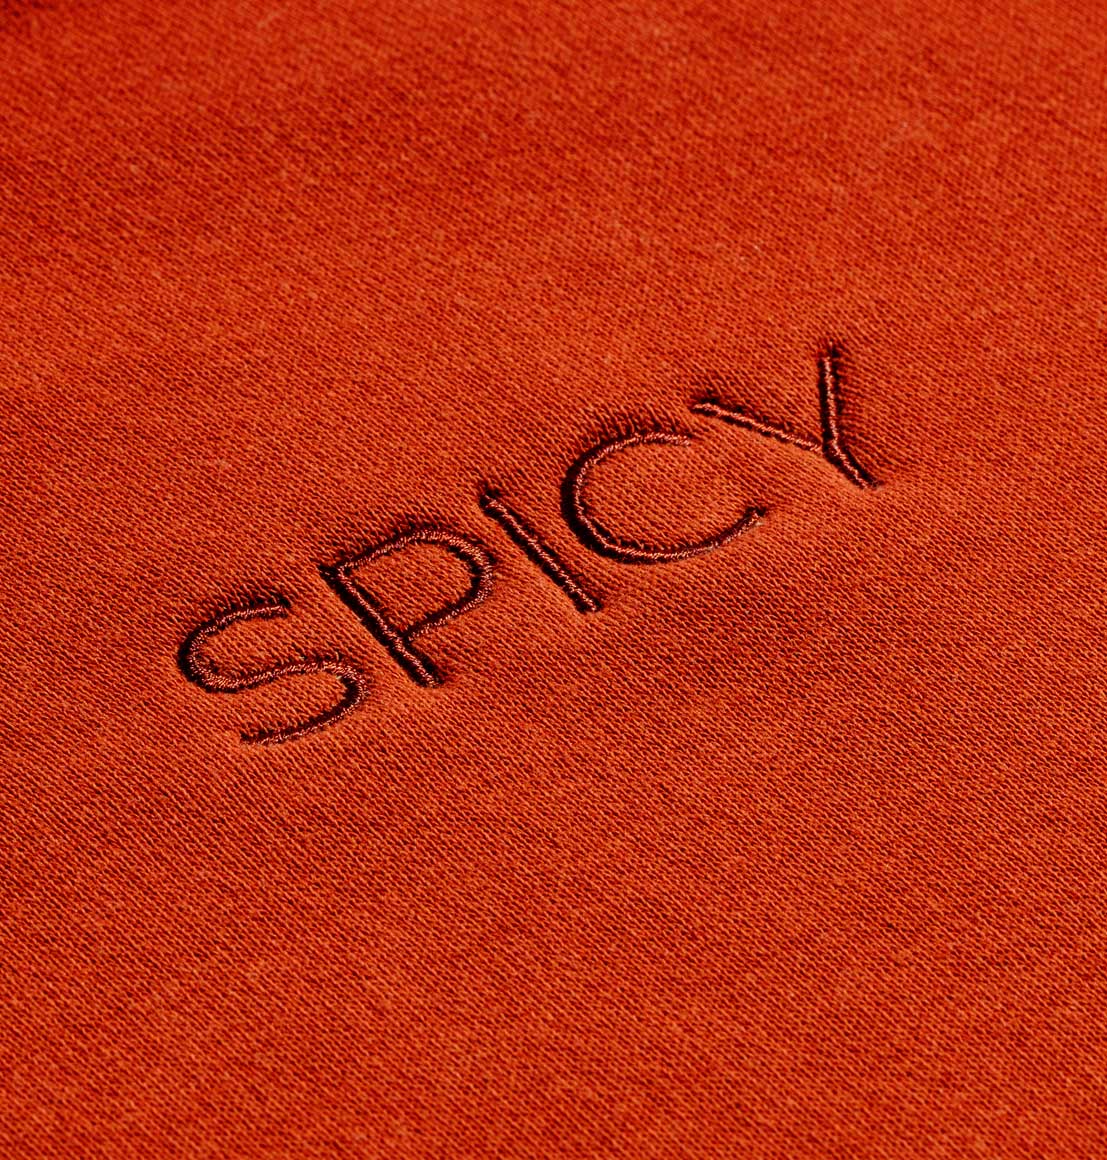 Close up of embroidery detail on spicy sweatshirt